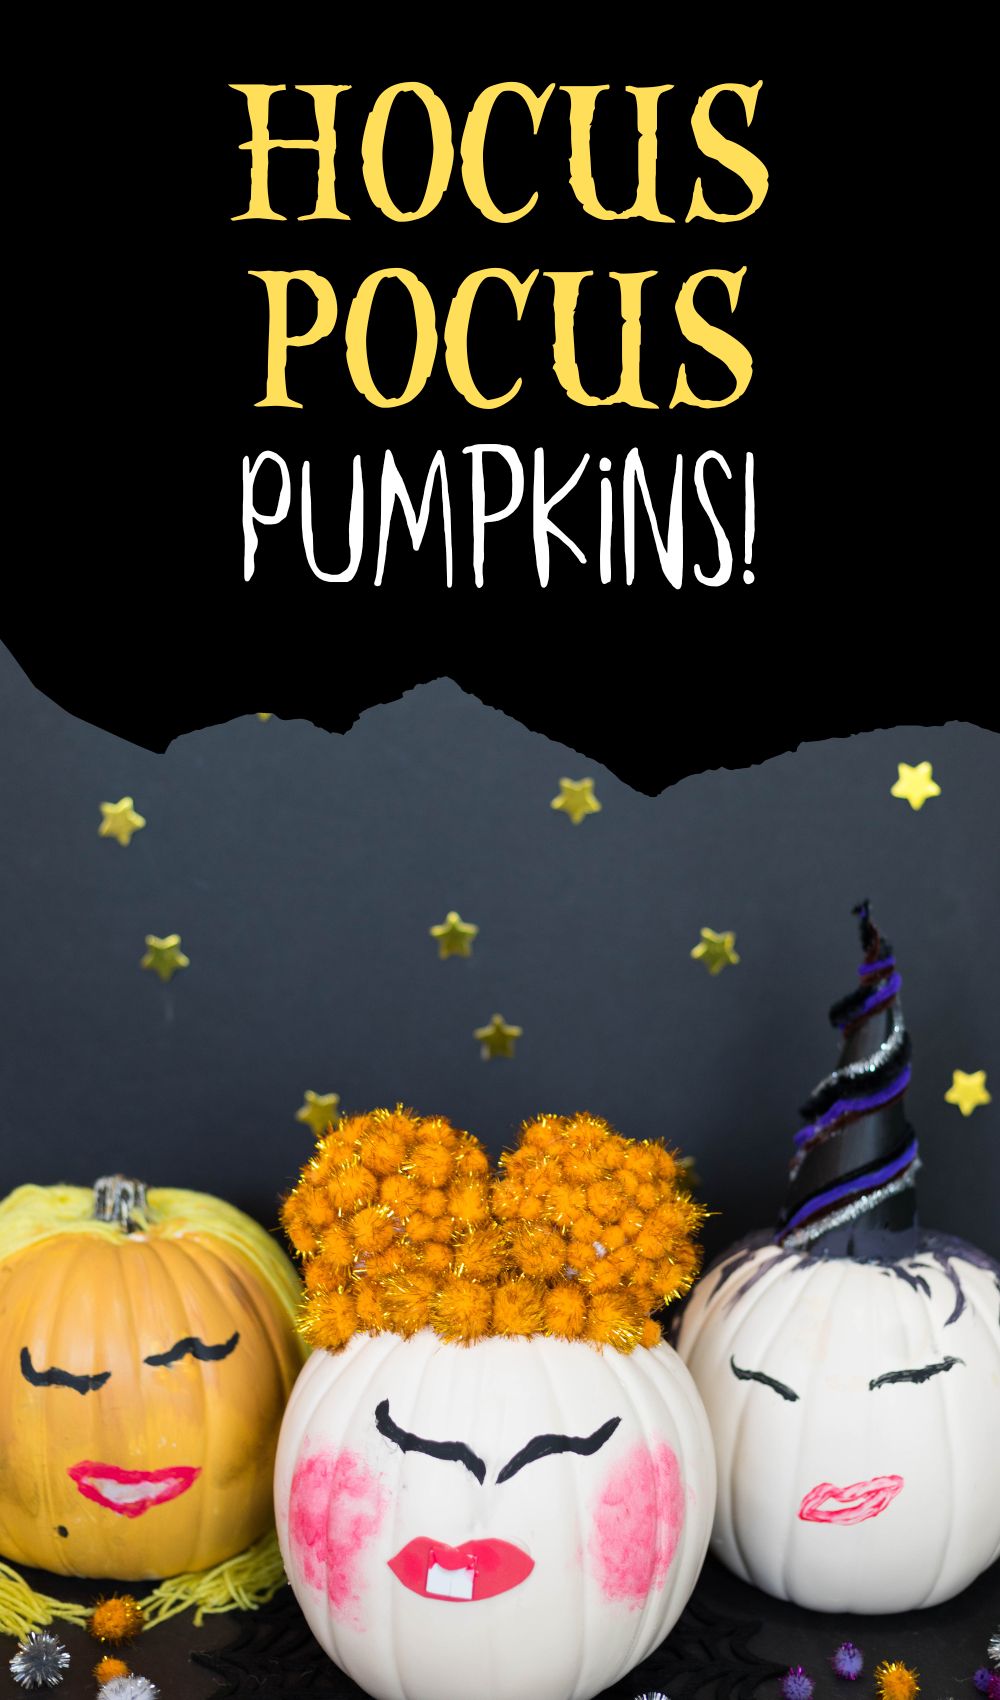 DIY Hocus Pocus pumpkins! Make the Sanderson sisters from Hocus Pocus 2 into pumpkins. Check out these simple tutorials for kids to make Winifred, Sarah and Mary pumpkins!